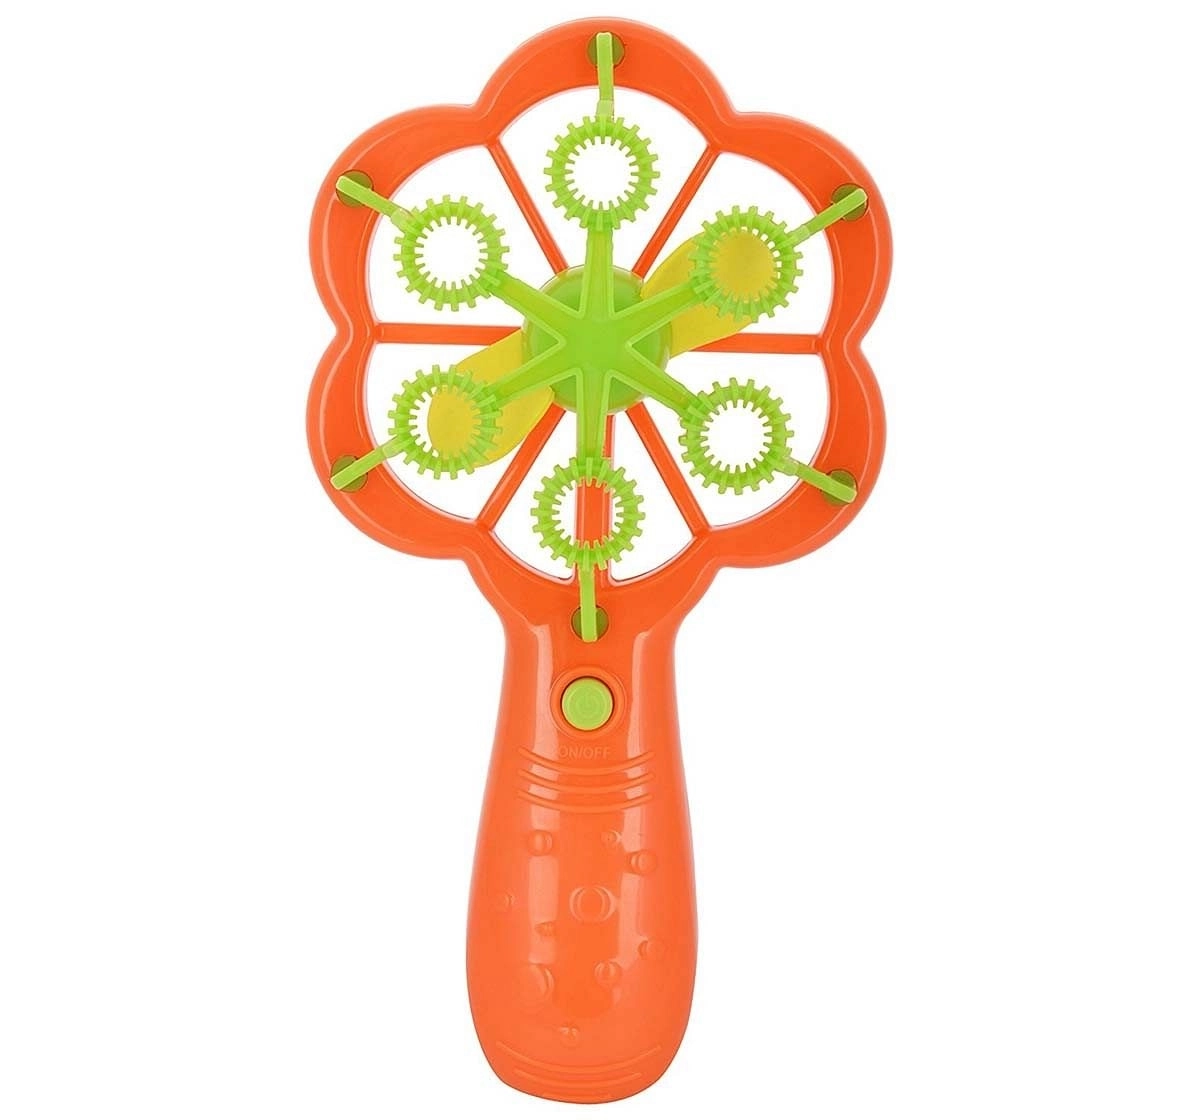 Rainbow Bubbles Flower Blower With Fuel Impulse Toys for Kids age 3Y+ 